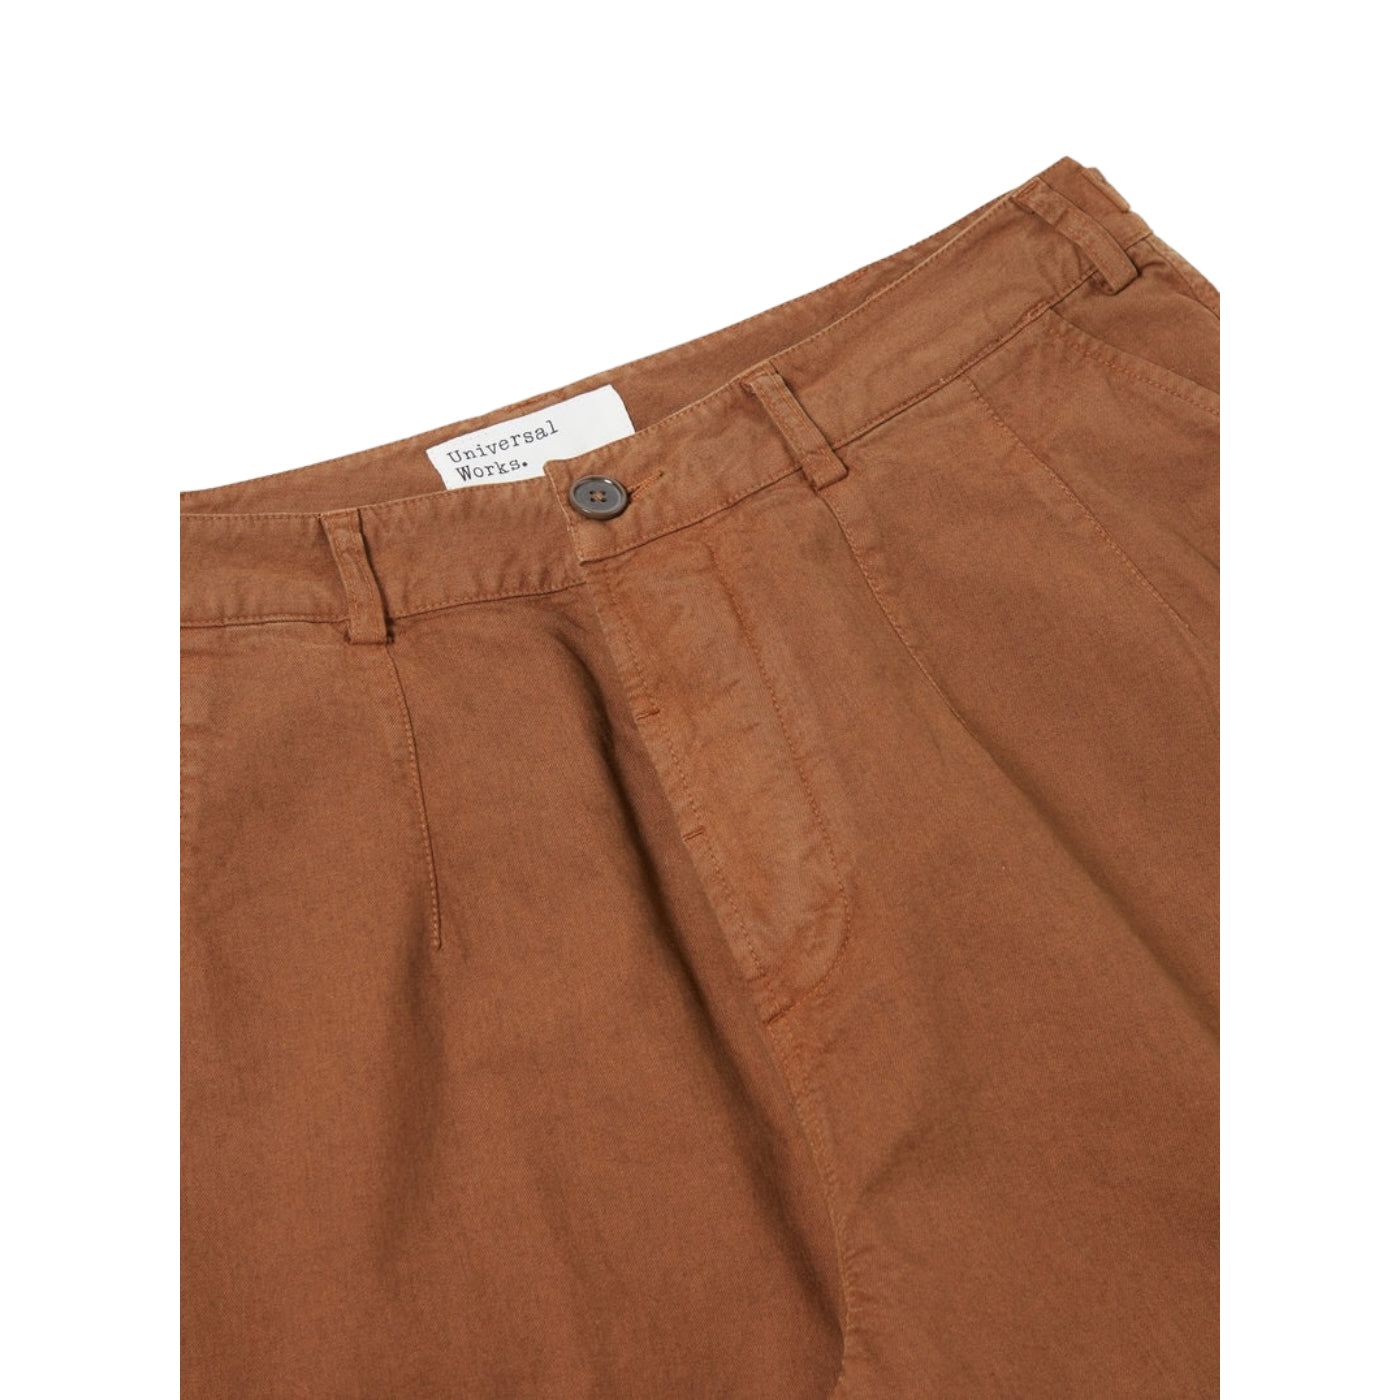 Universal Works Loose Cargo Pant marl twill brown P2723